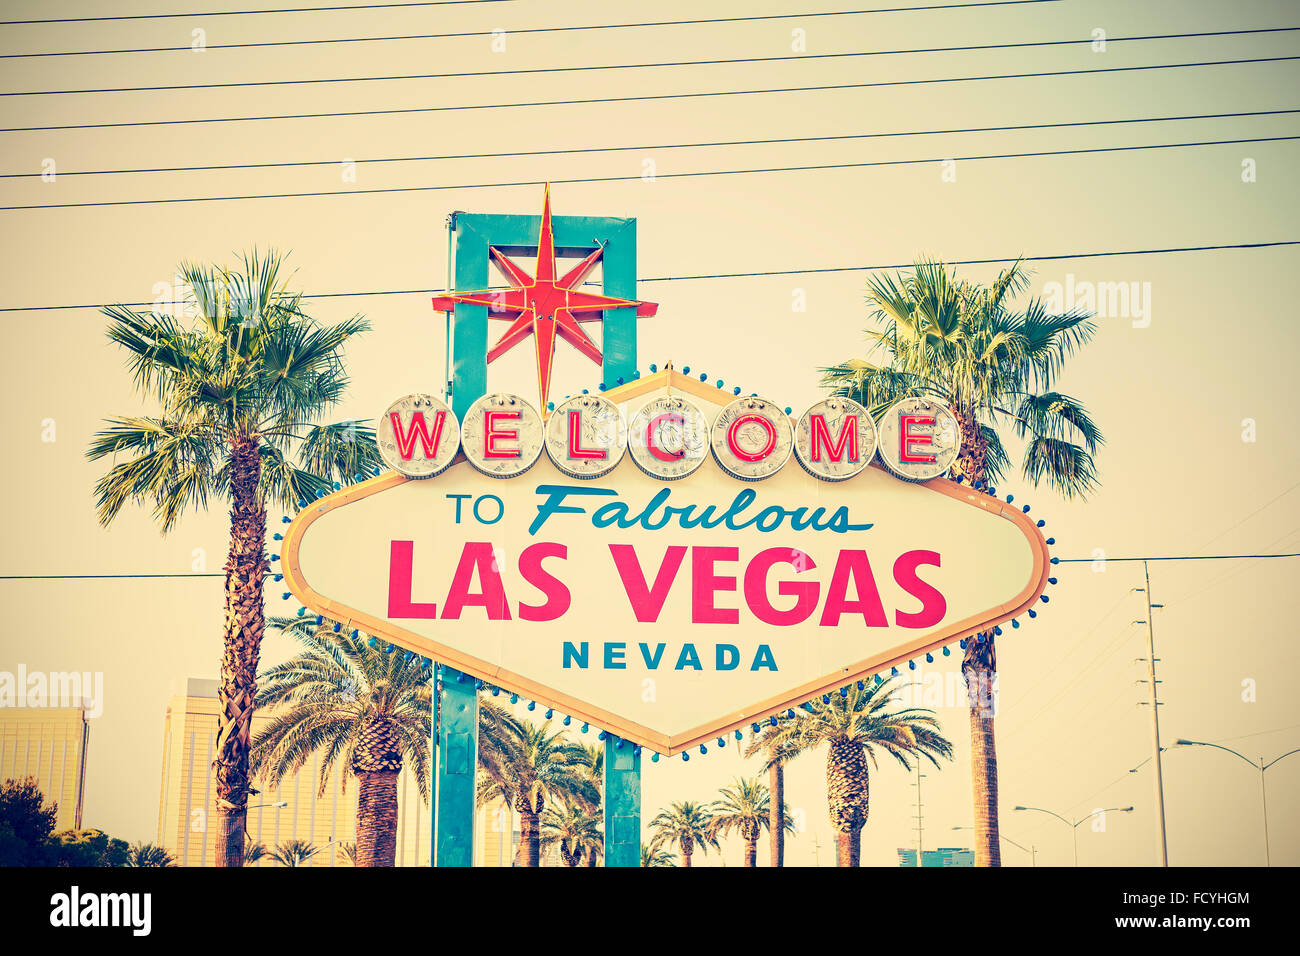 Old film style cross processed photo of the Welcome To Las Vegas Sign, USA. Stock Photo